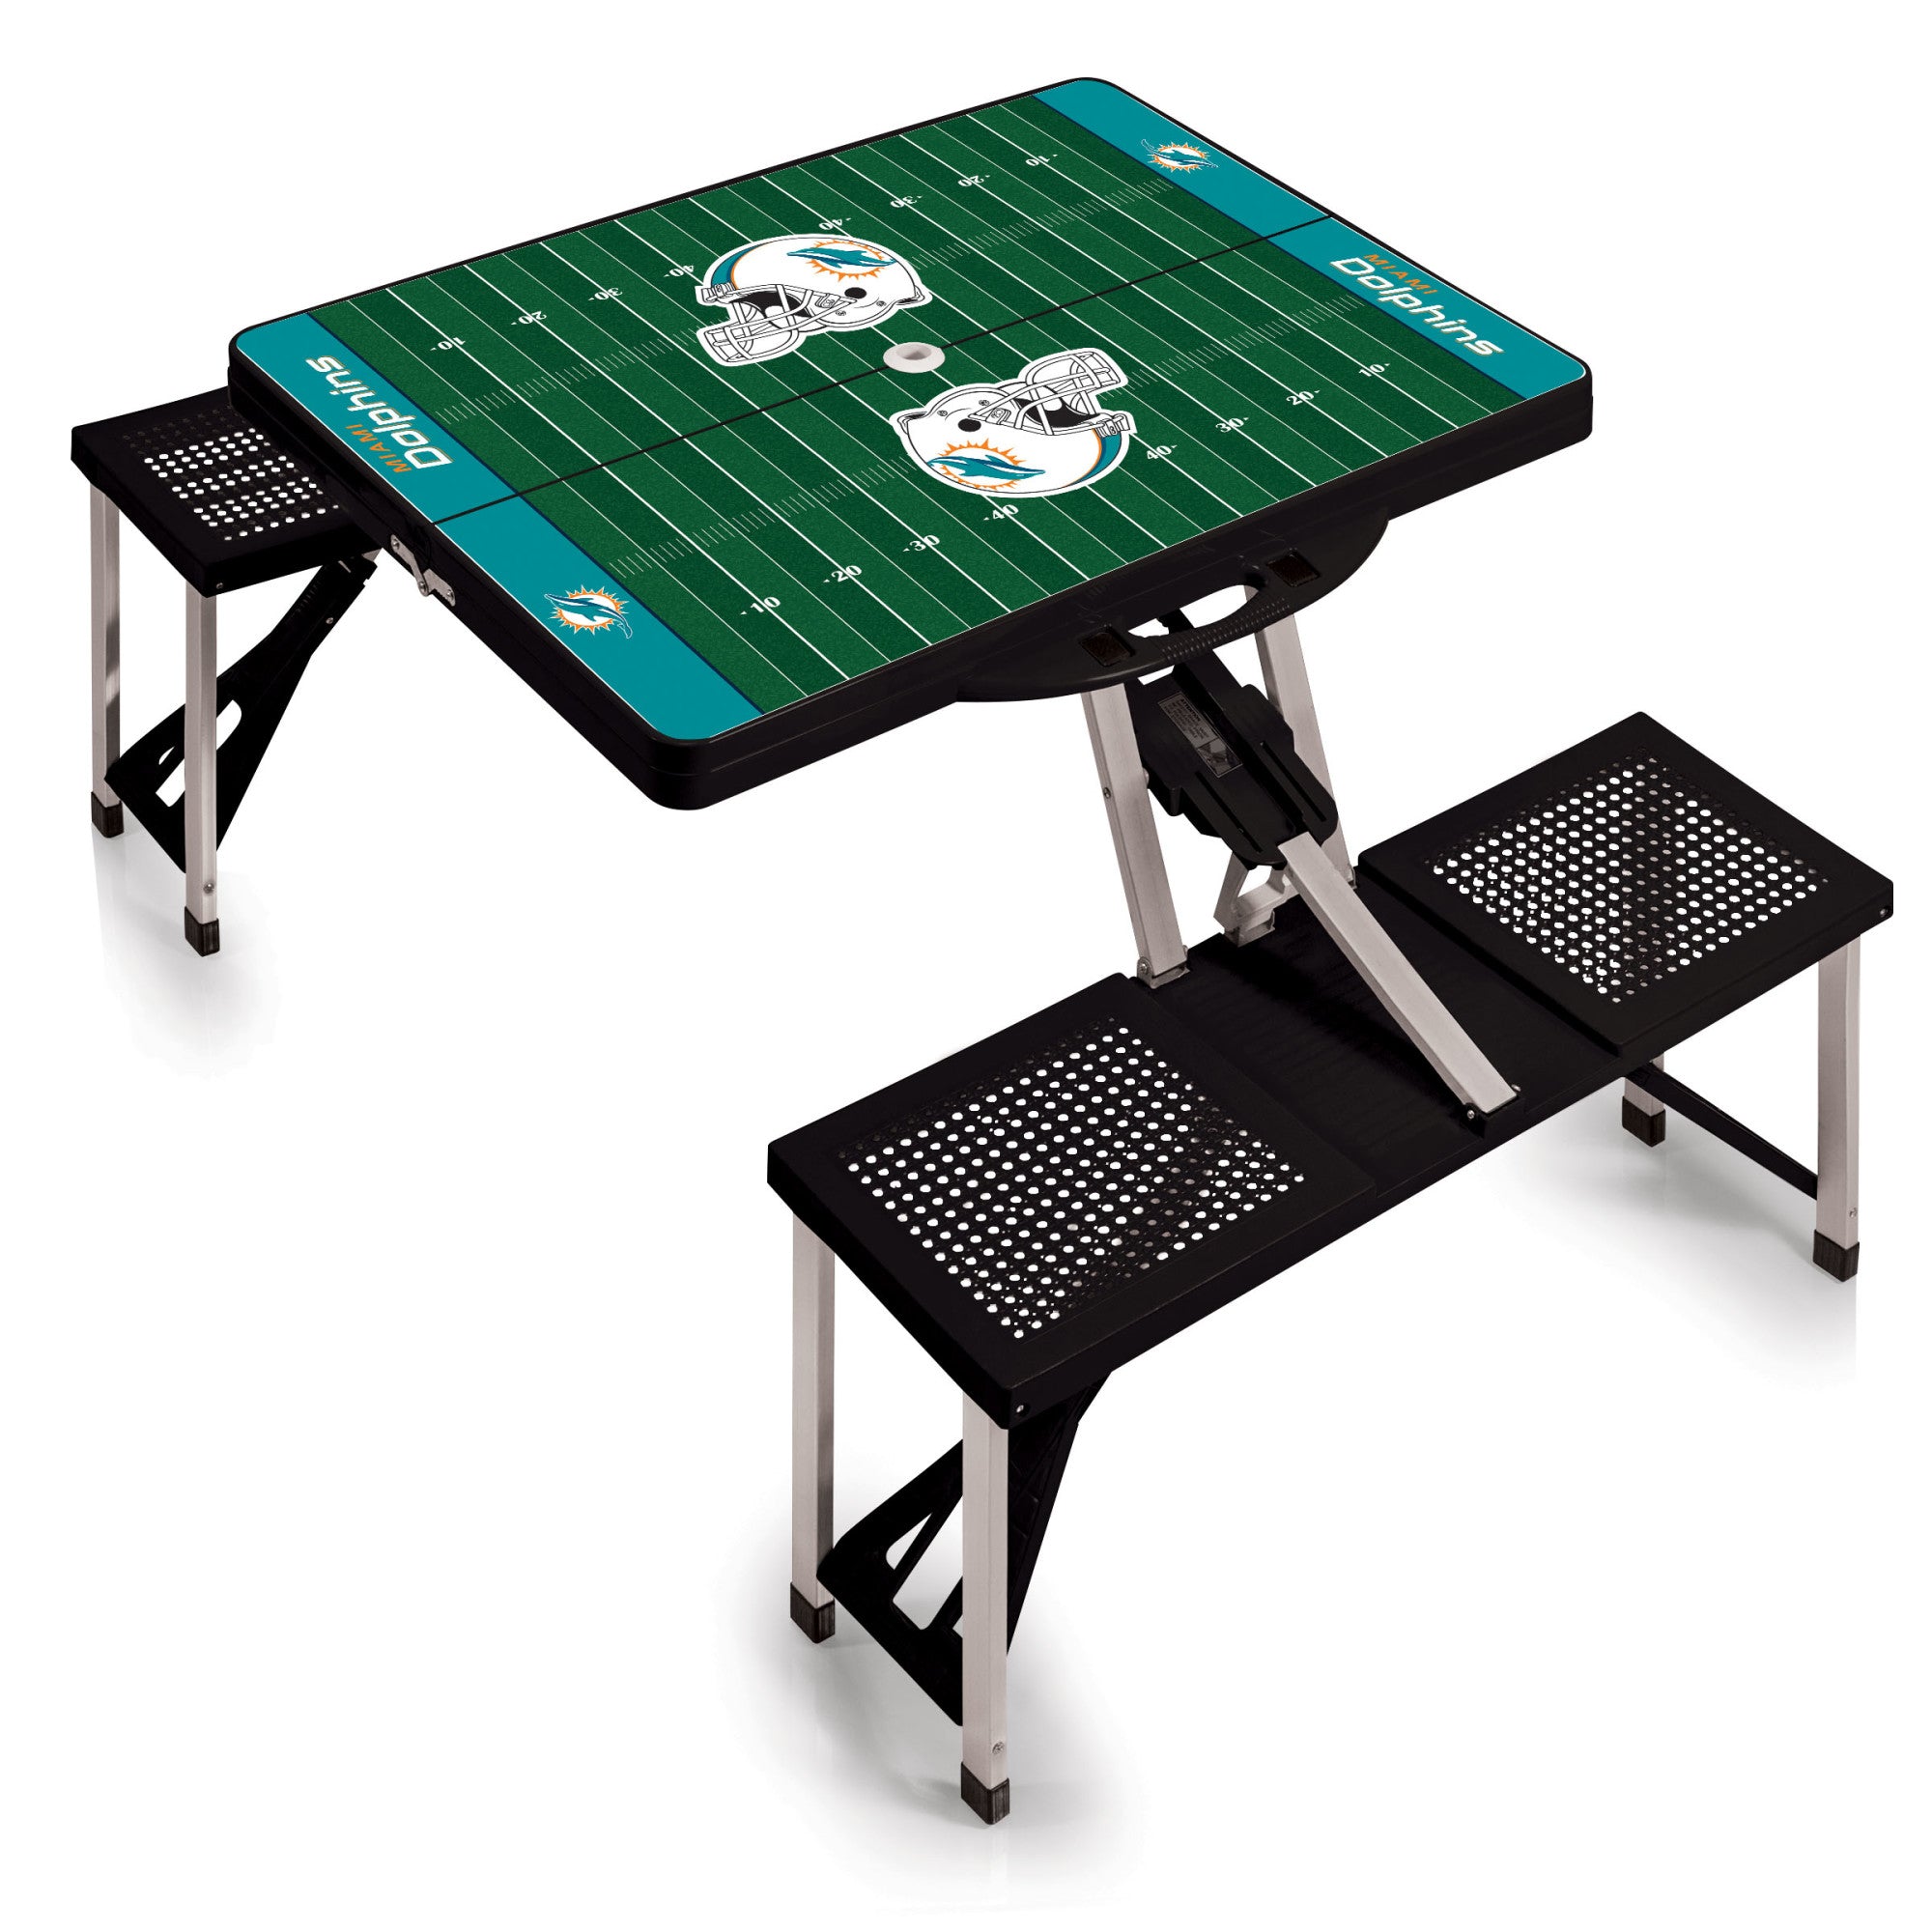 Miami Dolphins - Picnic Table Portable Folding Table with Seats and Umbrella